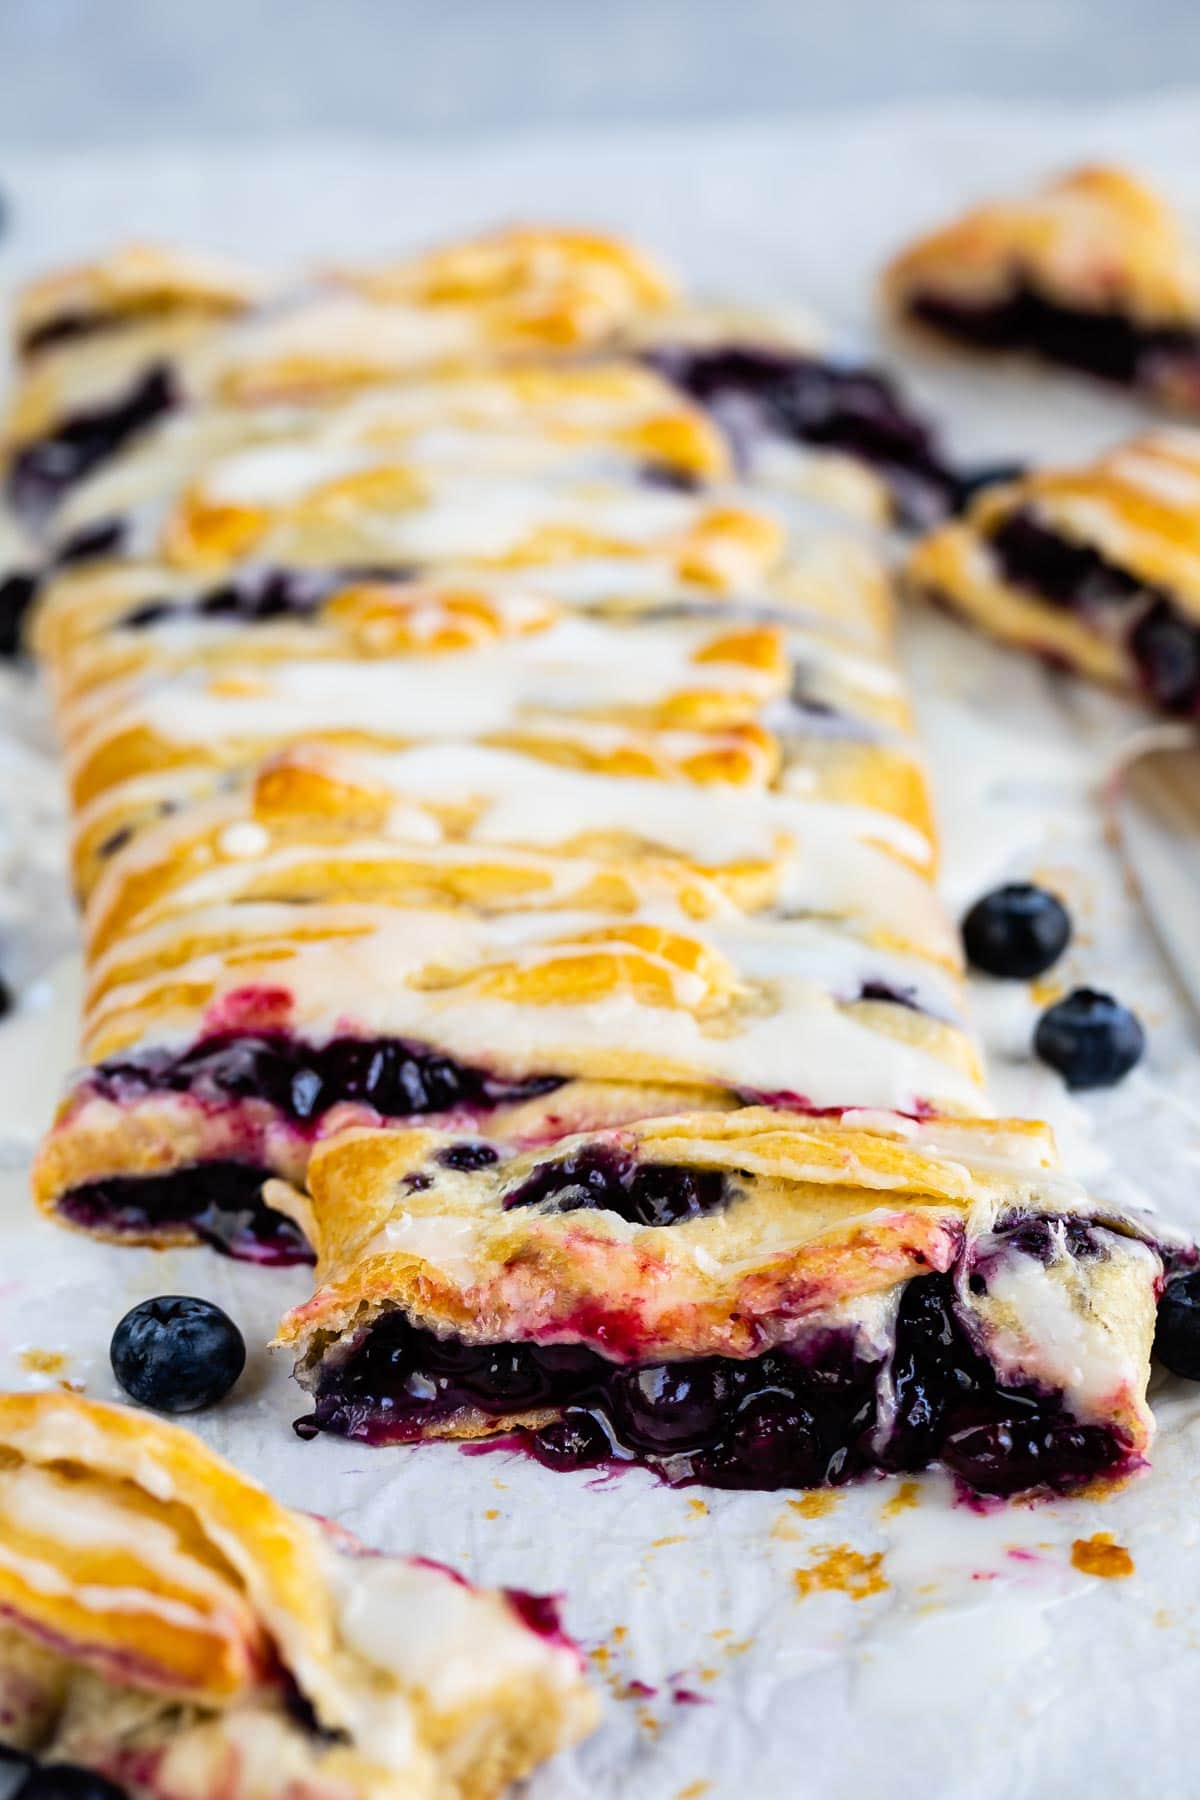 Blueberry danish with icing on top with one piece sliced on the end